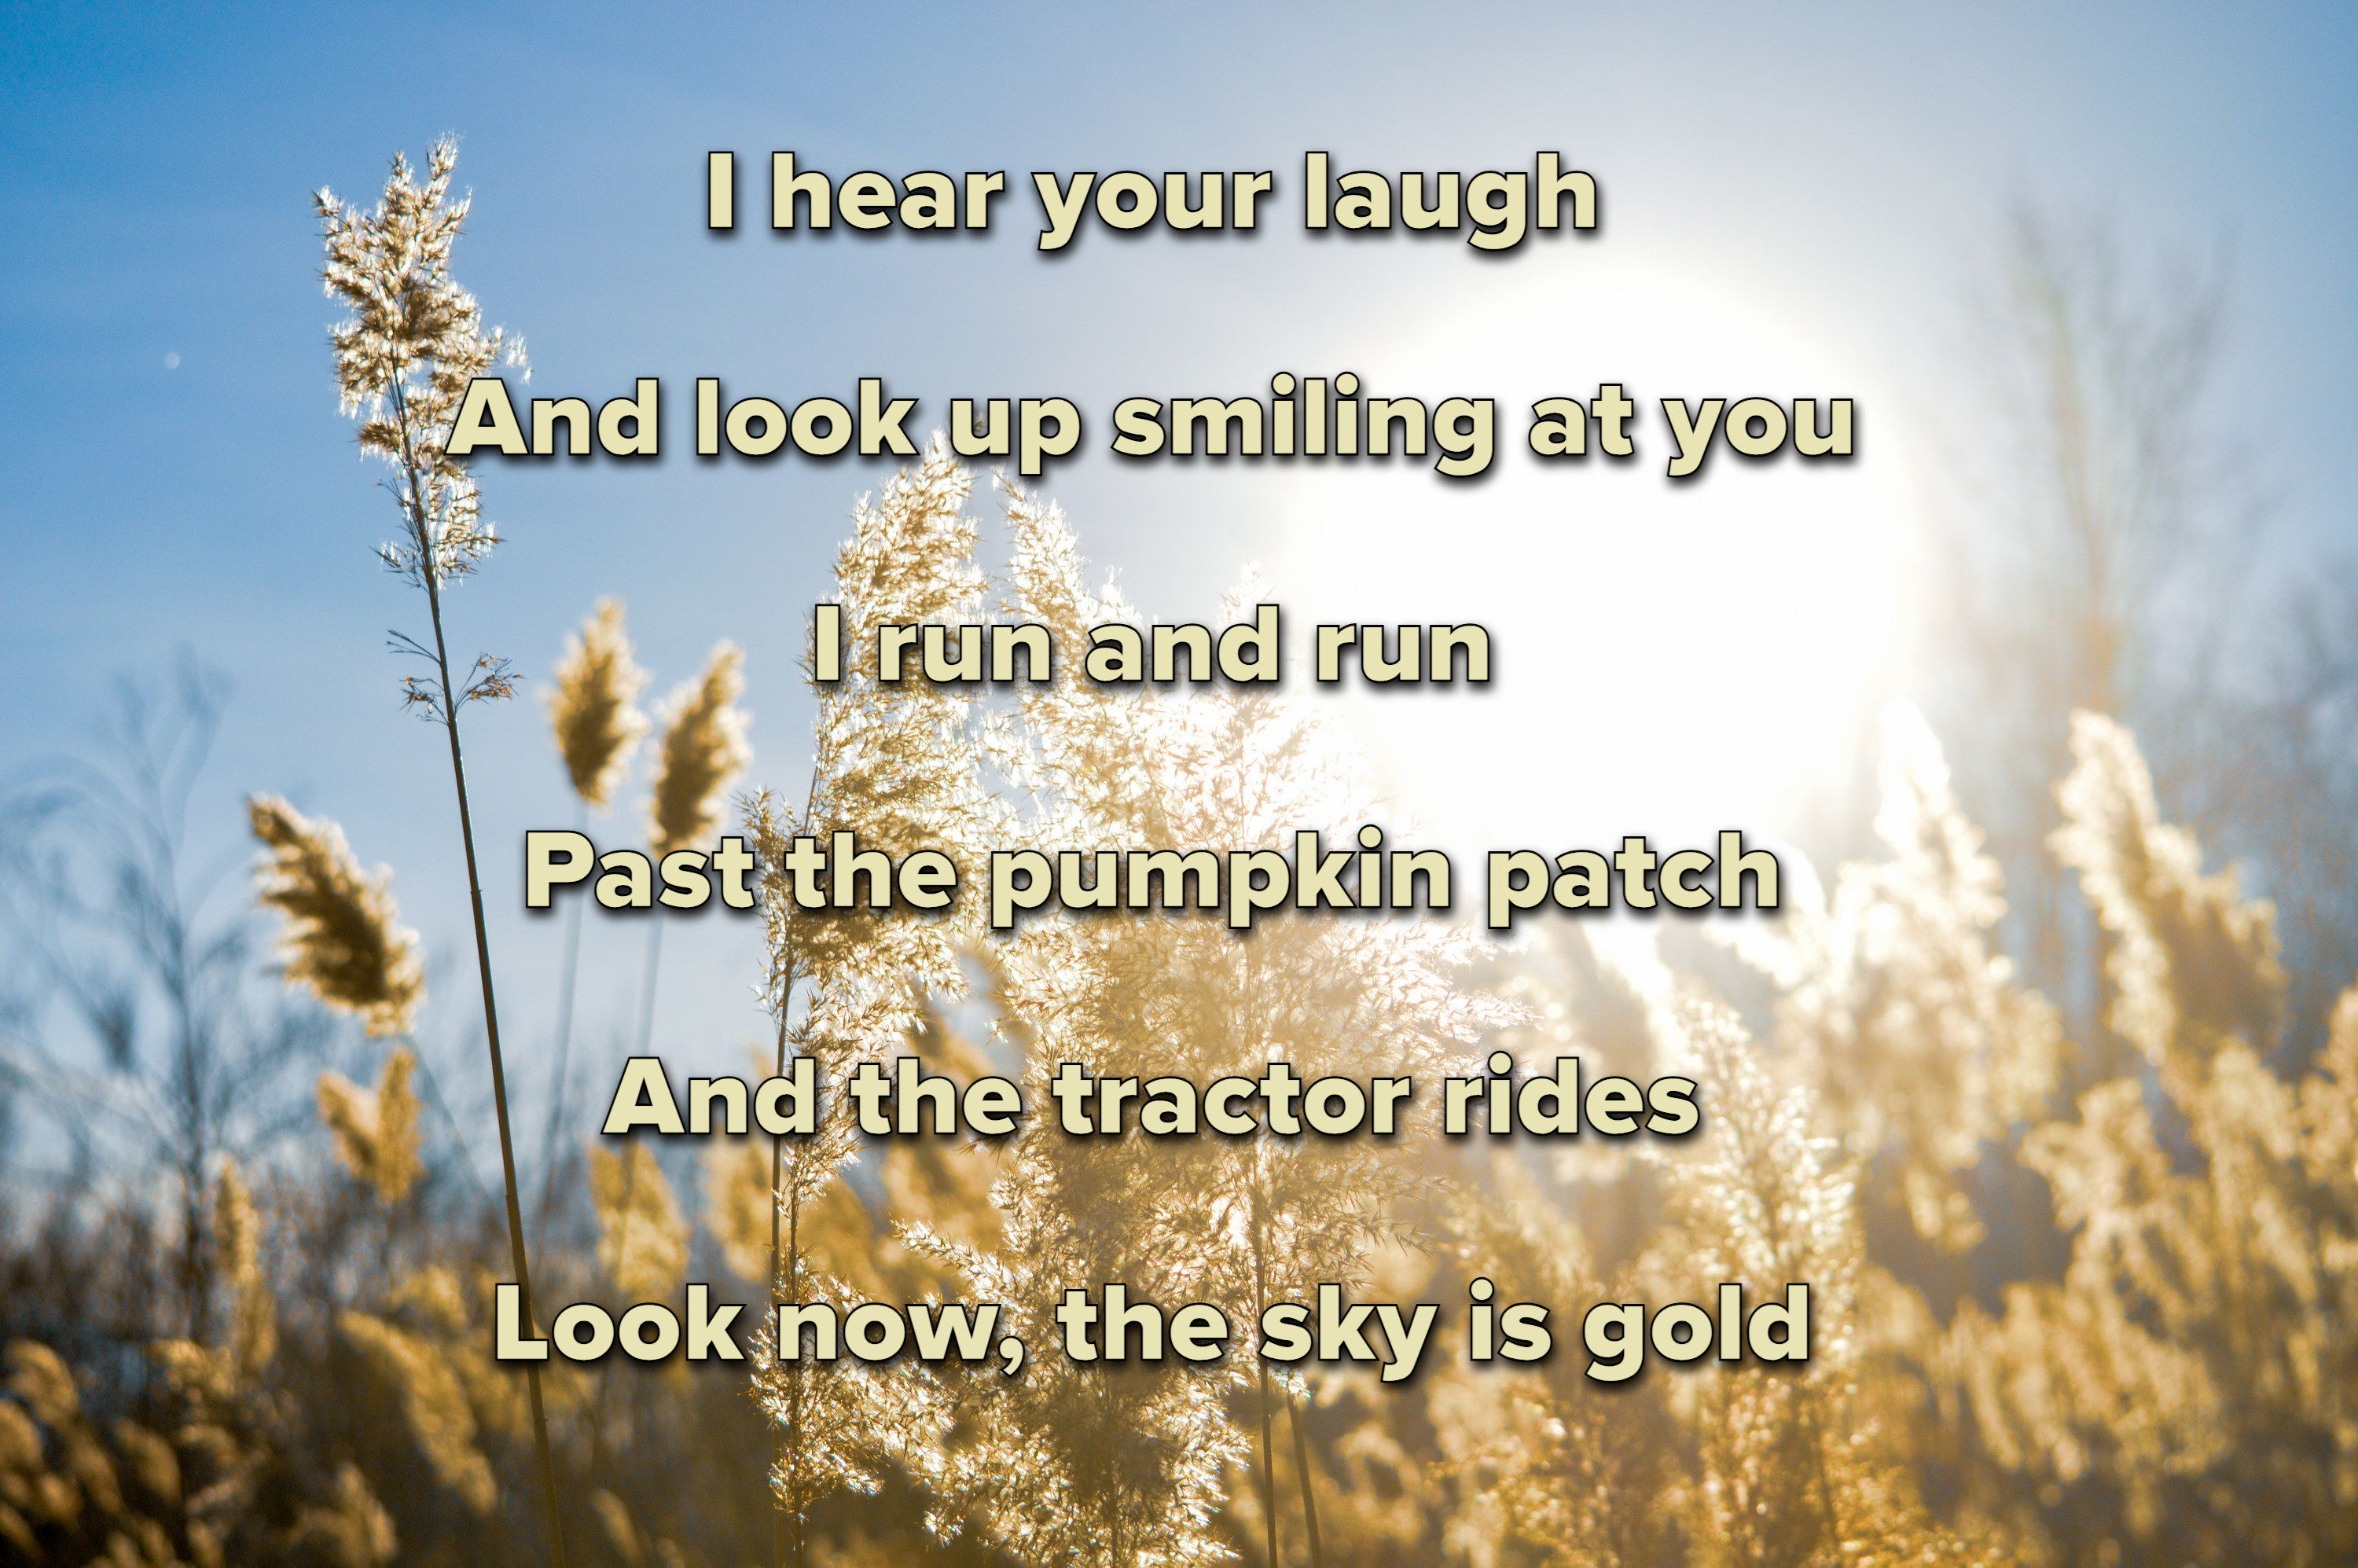 Photo of a wheat field with lyrics from &quot;The Best Day&quot; by Taylor Swift written in text